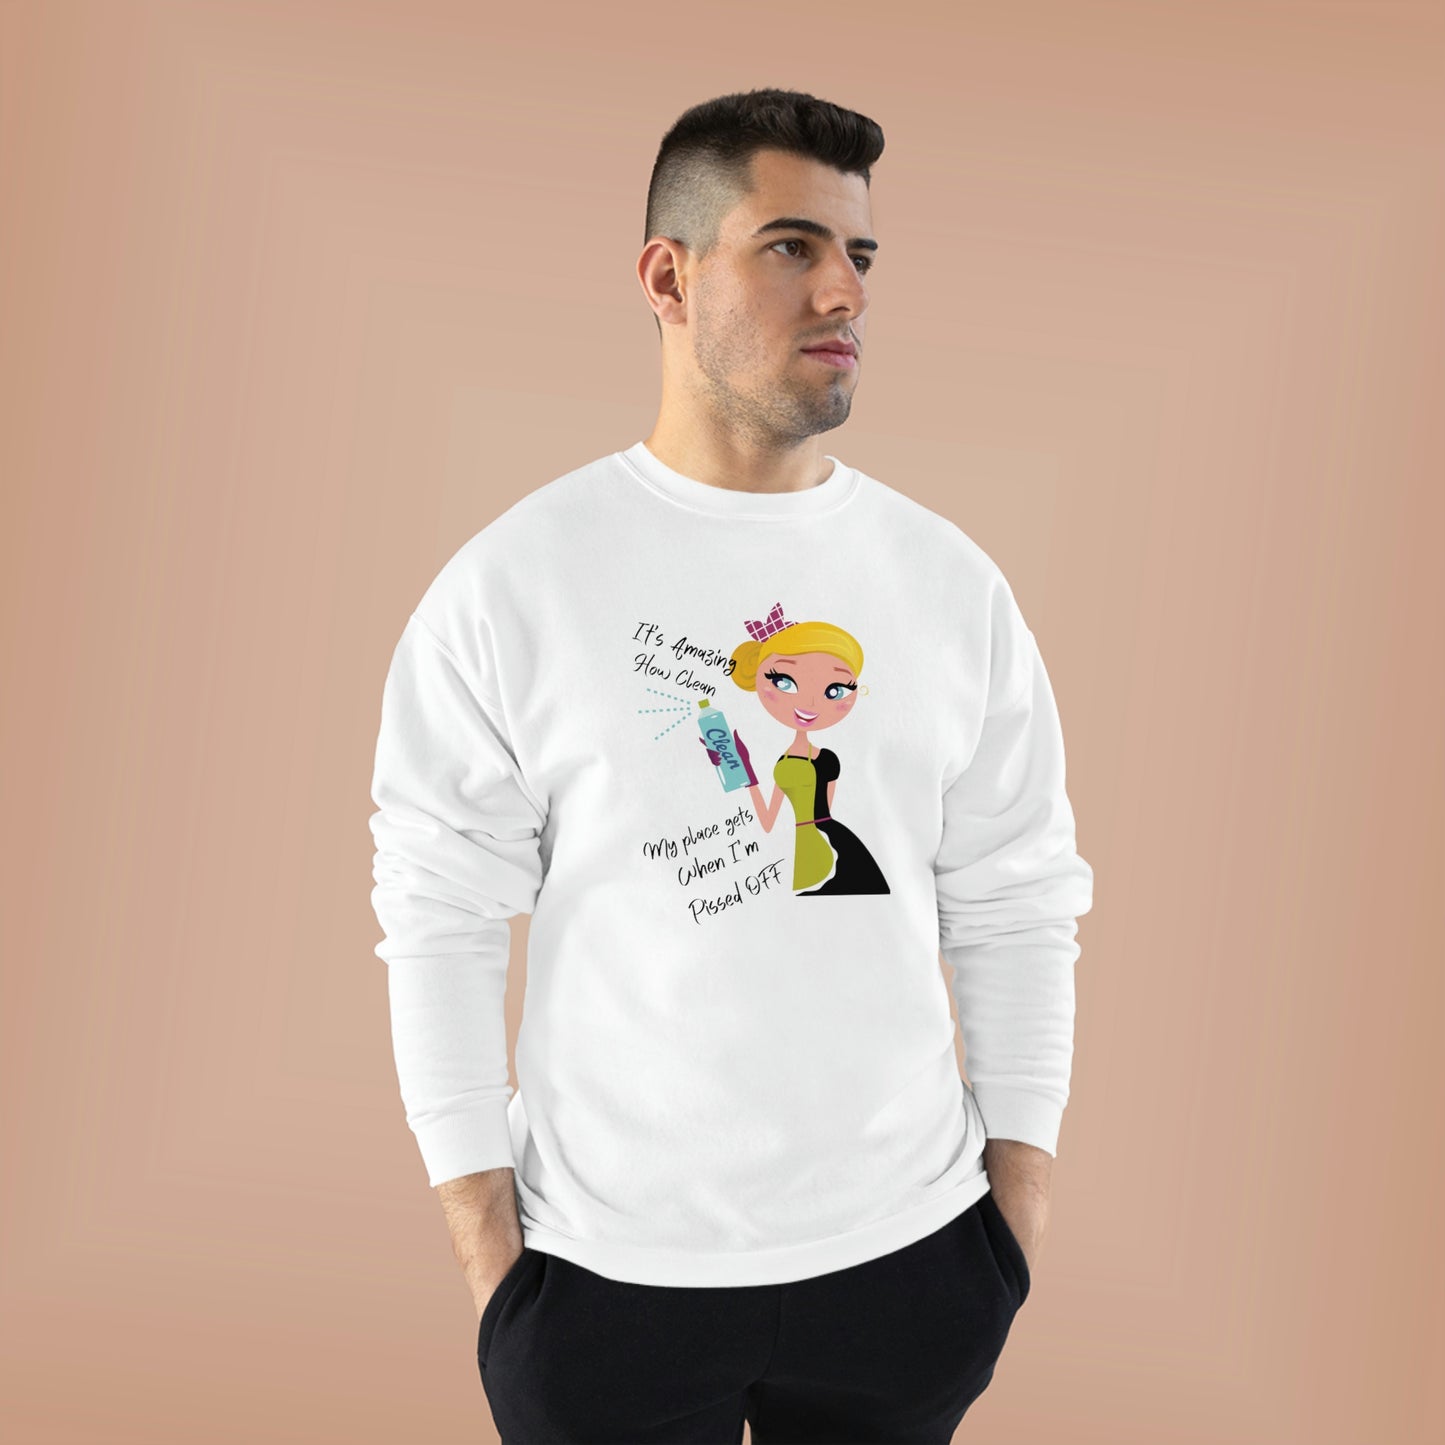 ‘It’s Amazing how Clean my Place gets When I’m Pissed Off’  Printed Front & Back  Unisex EcoSmart® Crewneck Sweatshirt